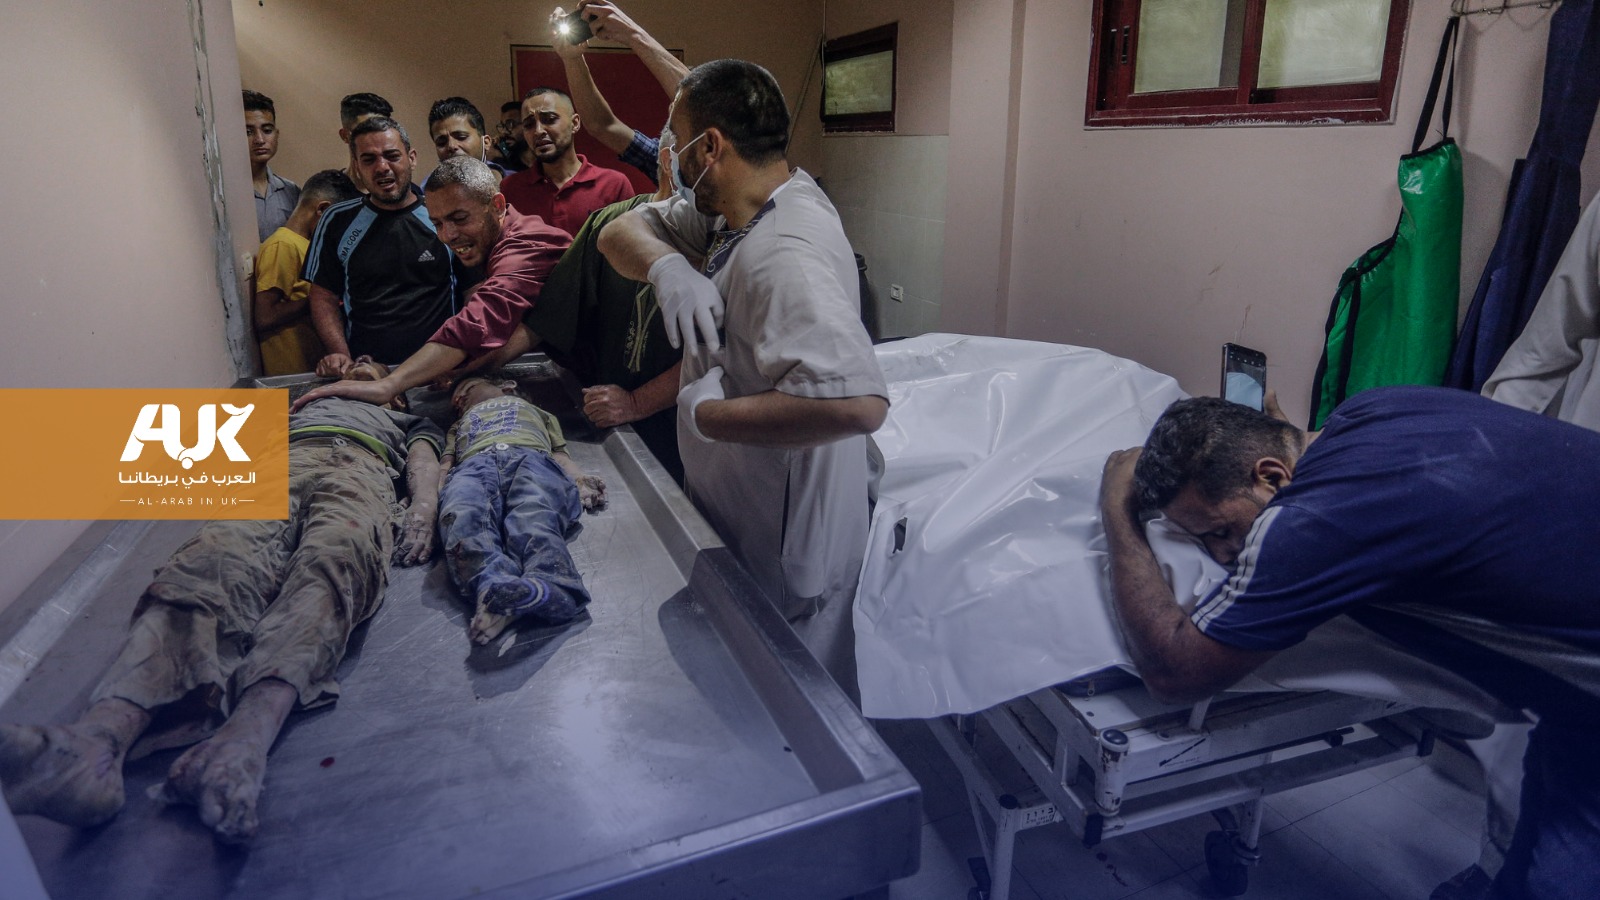 “Trauma” confronts doctors who are not prepared for war in Gaza